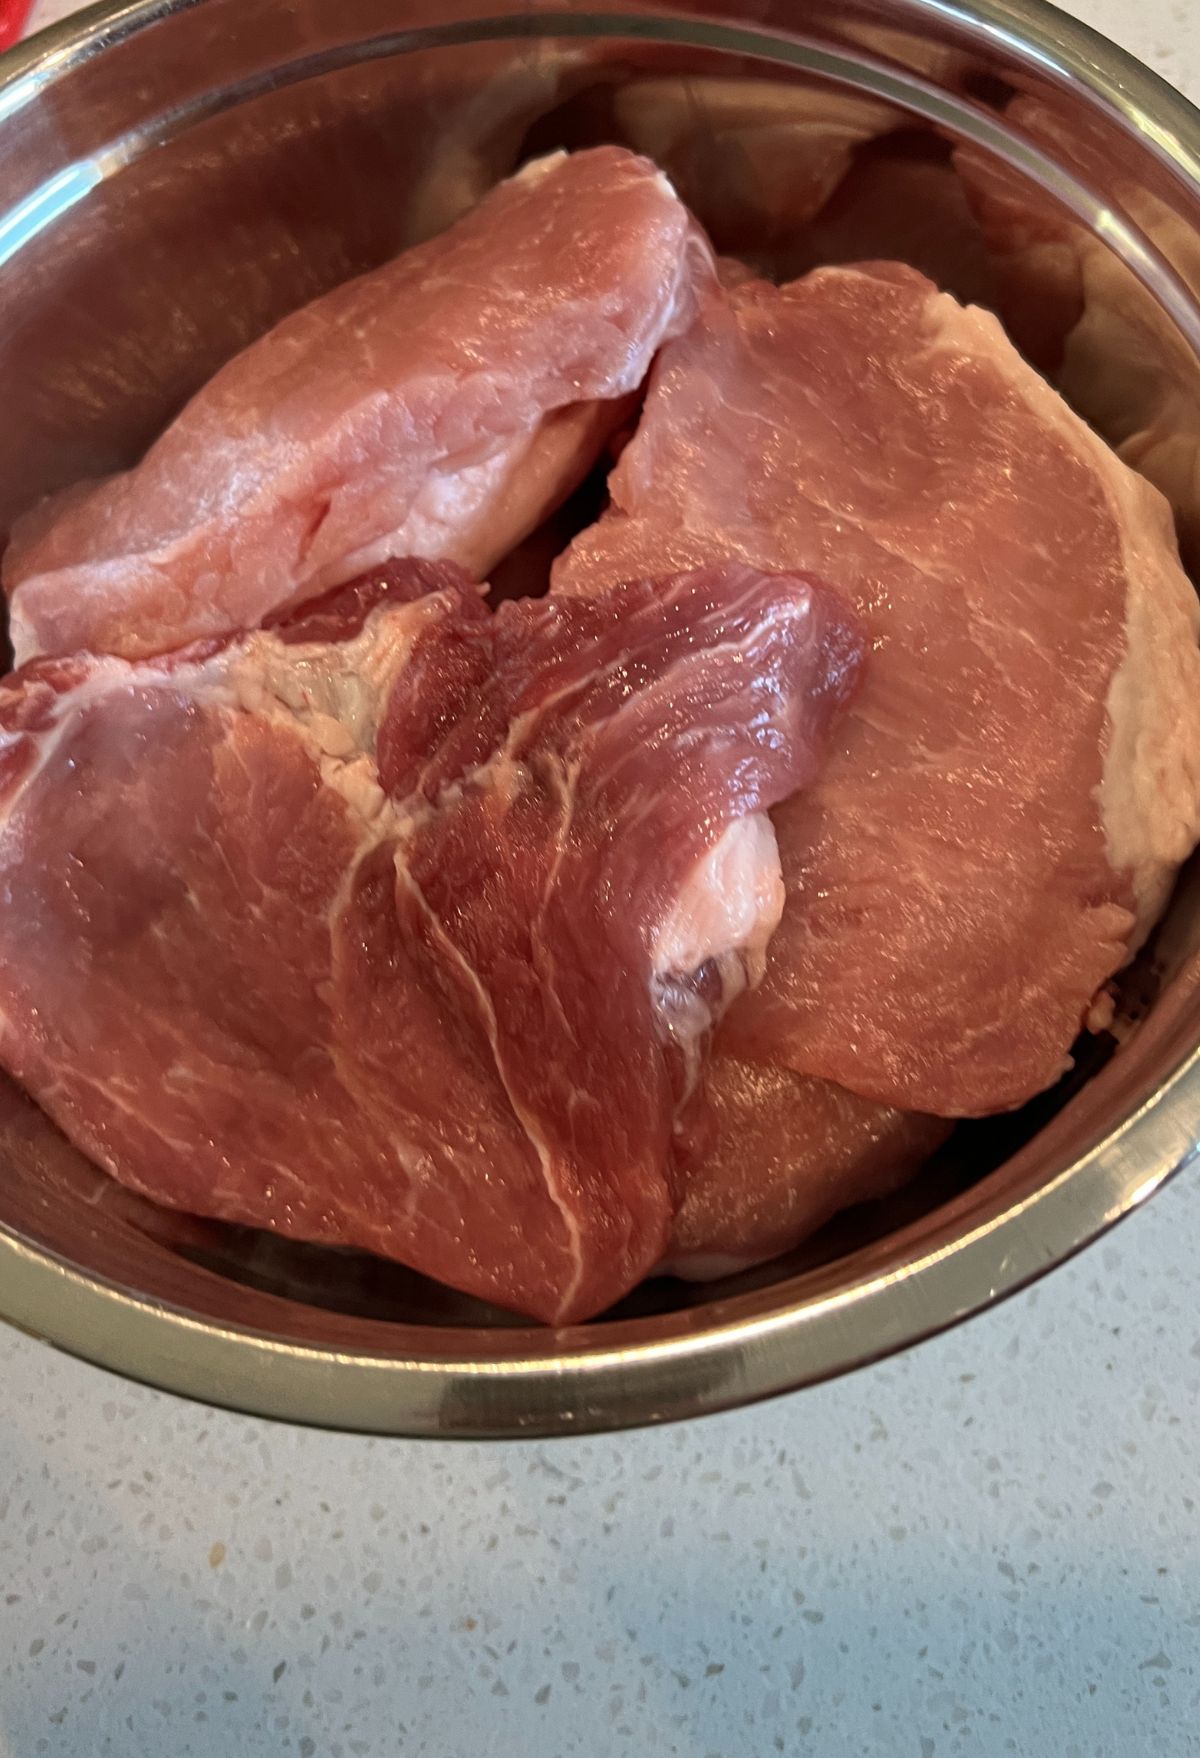 Raw pork chops in a stainless steel bowl.